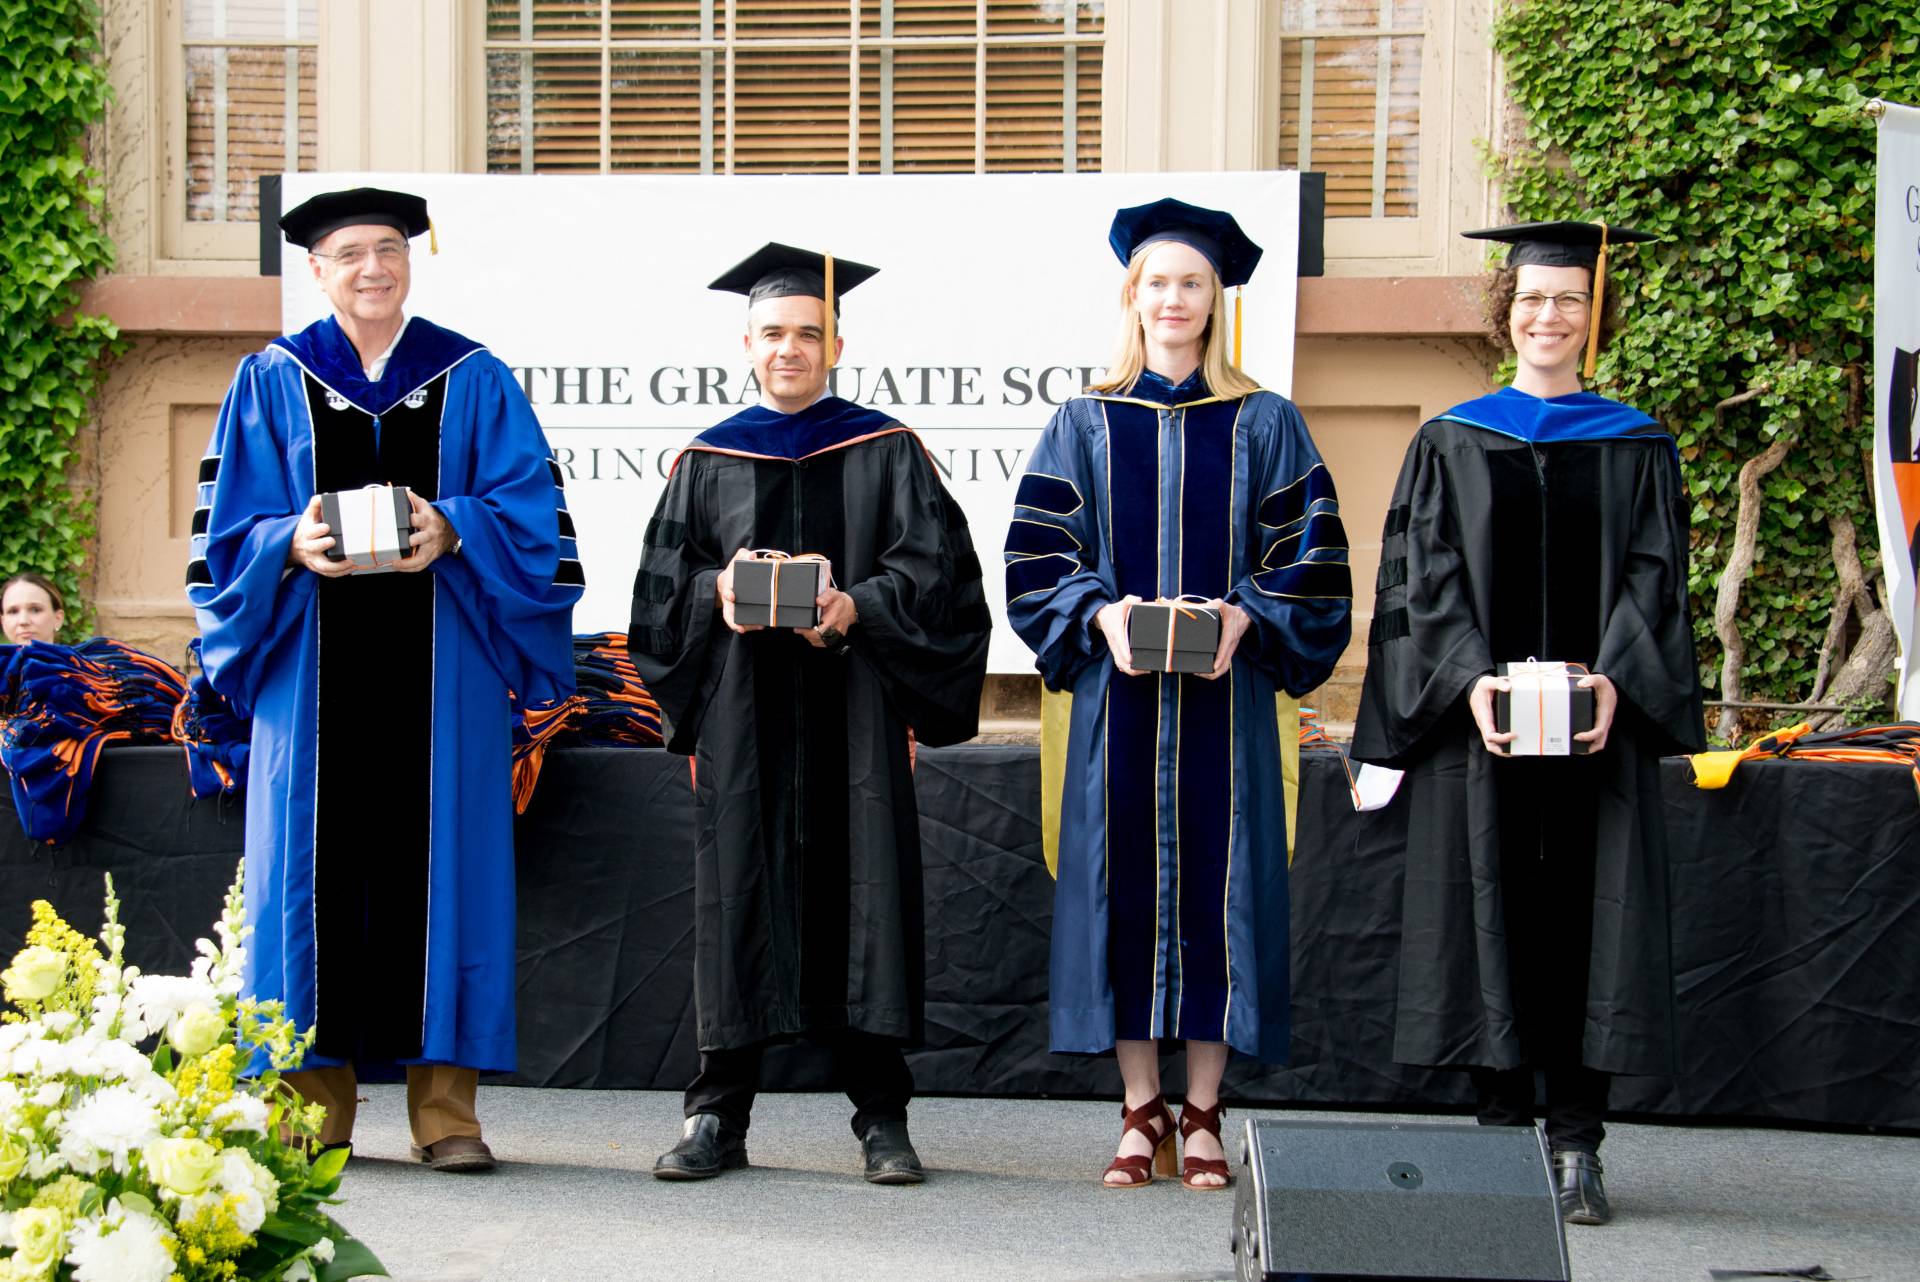 Graduate Mentoring Awards recipients at Hooding Ceremony stand together on stage